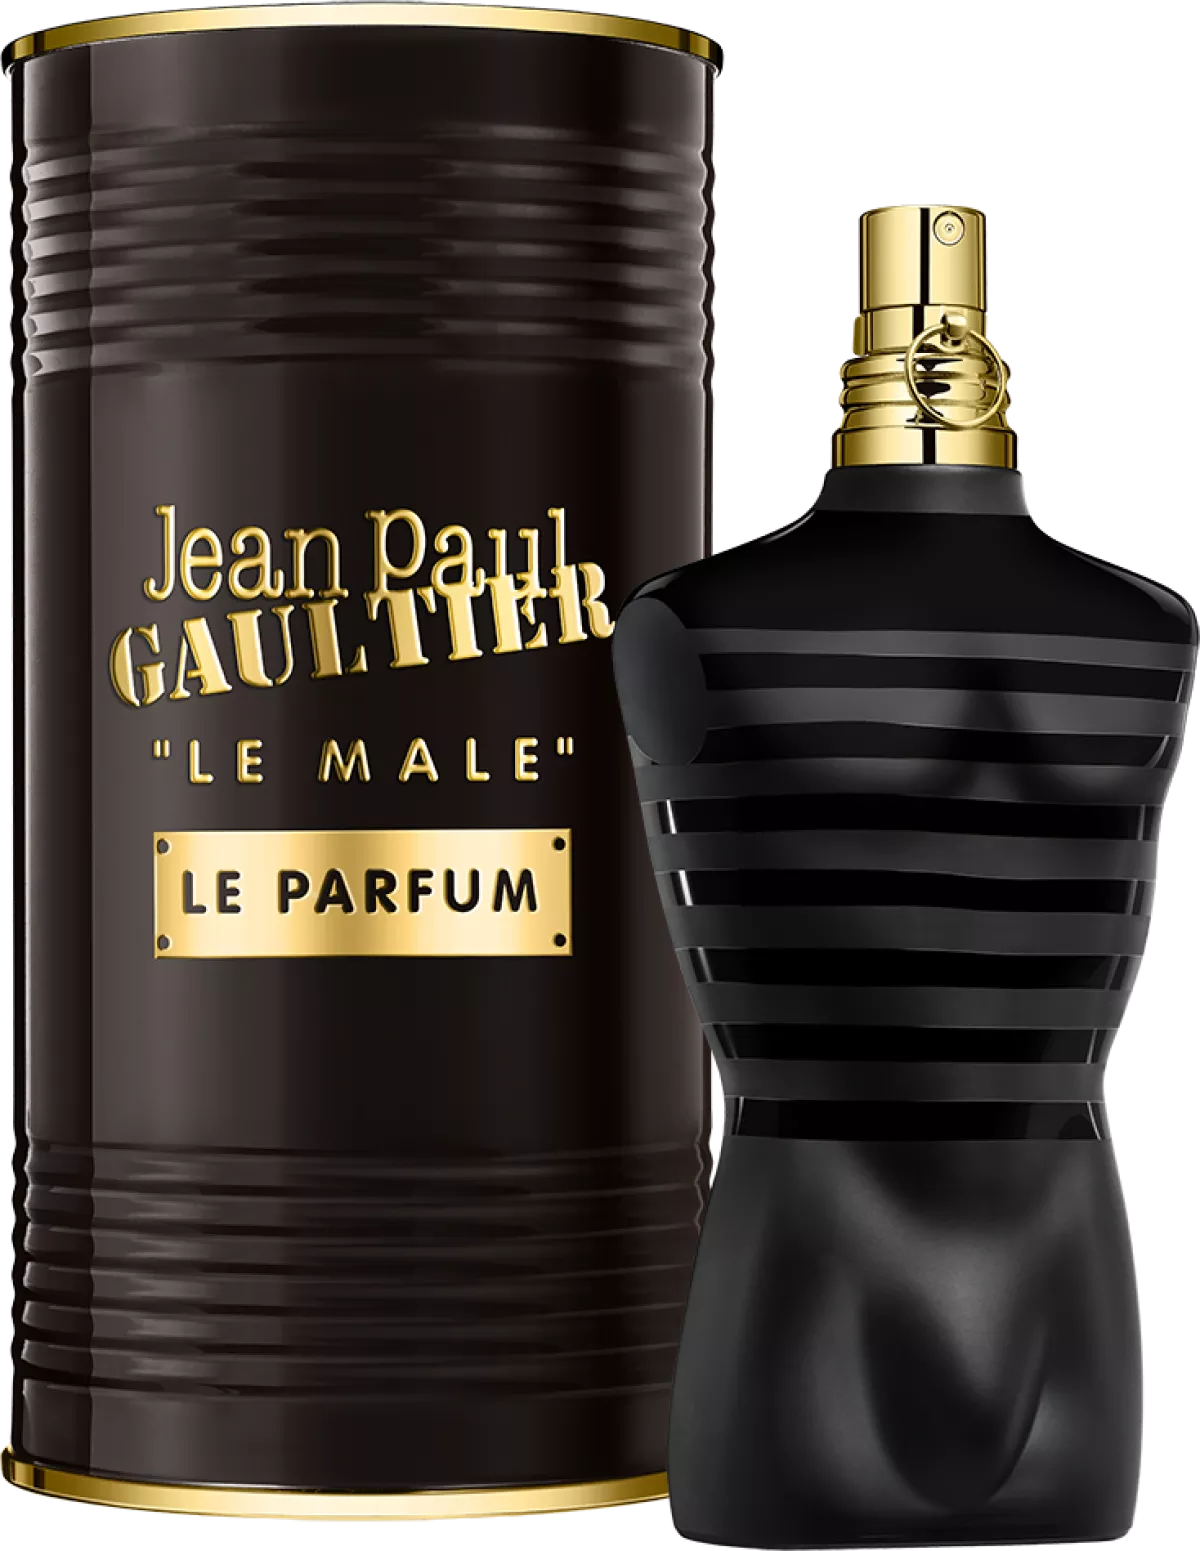 LE MALE ON BOARD EDT 125ML